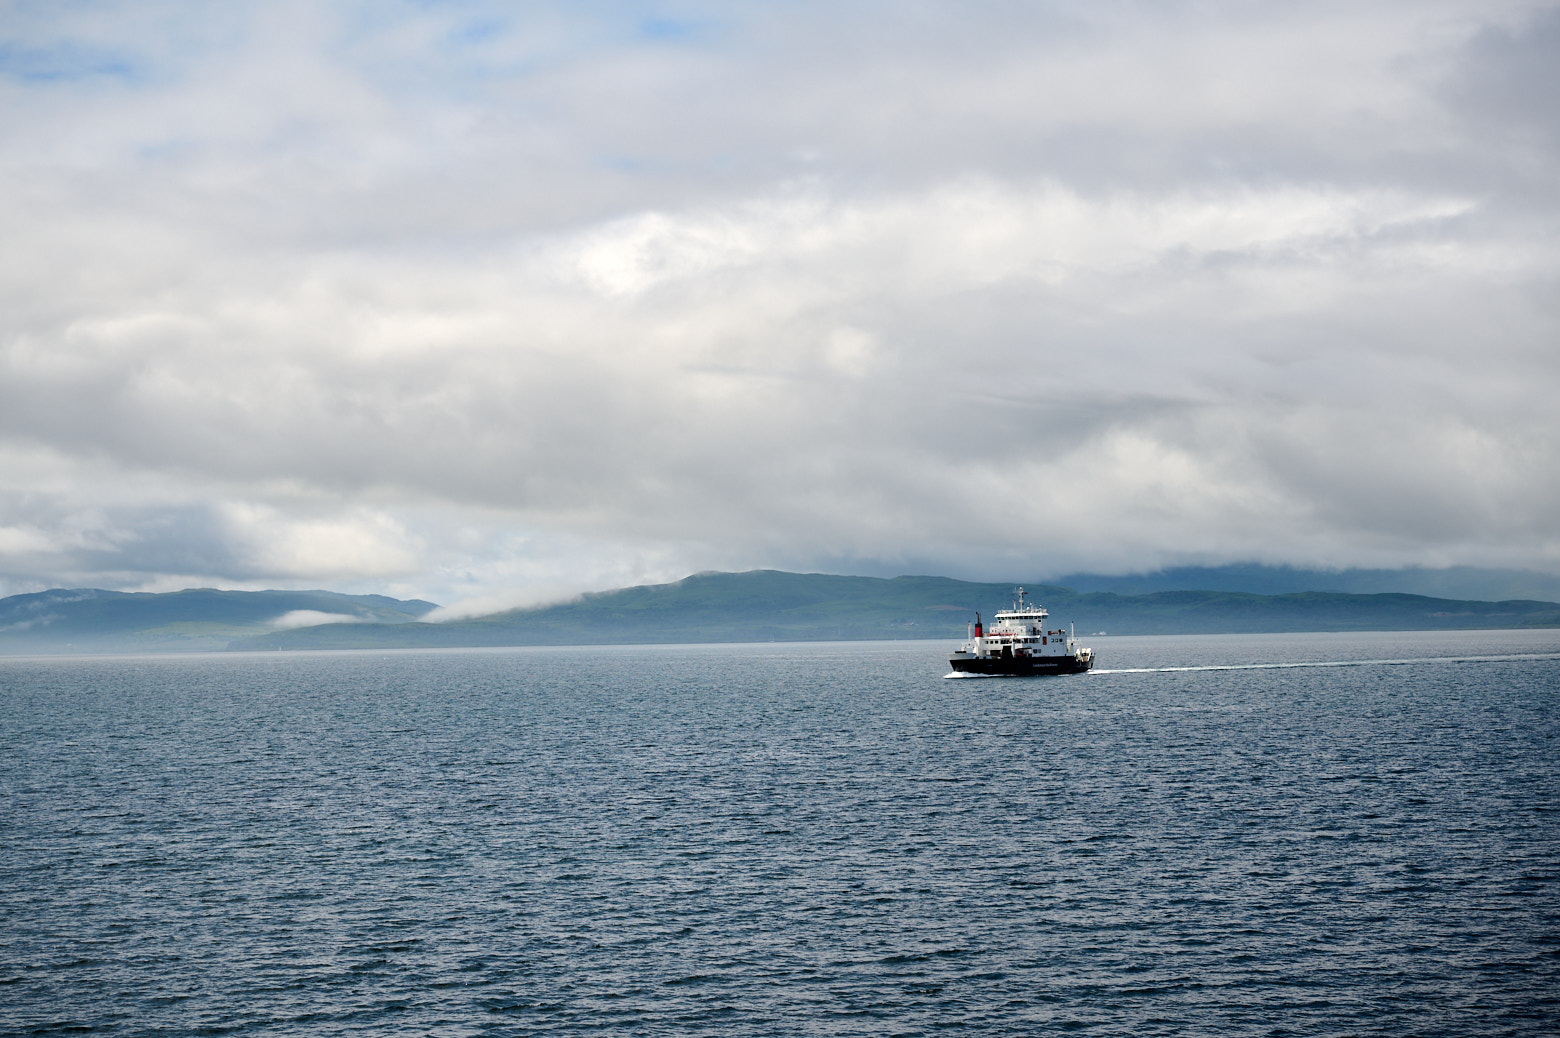 On the ferry from Oban to Barra in the Outer Hebrides.